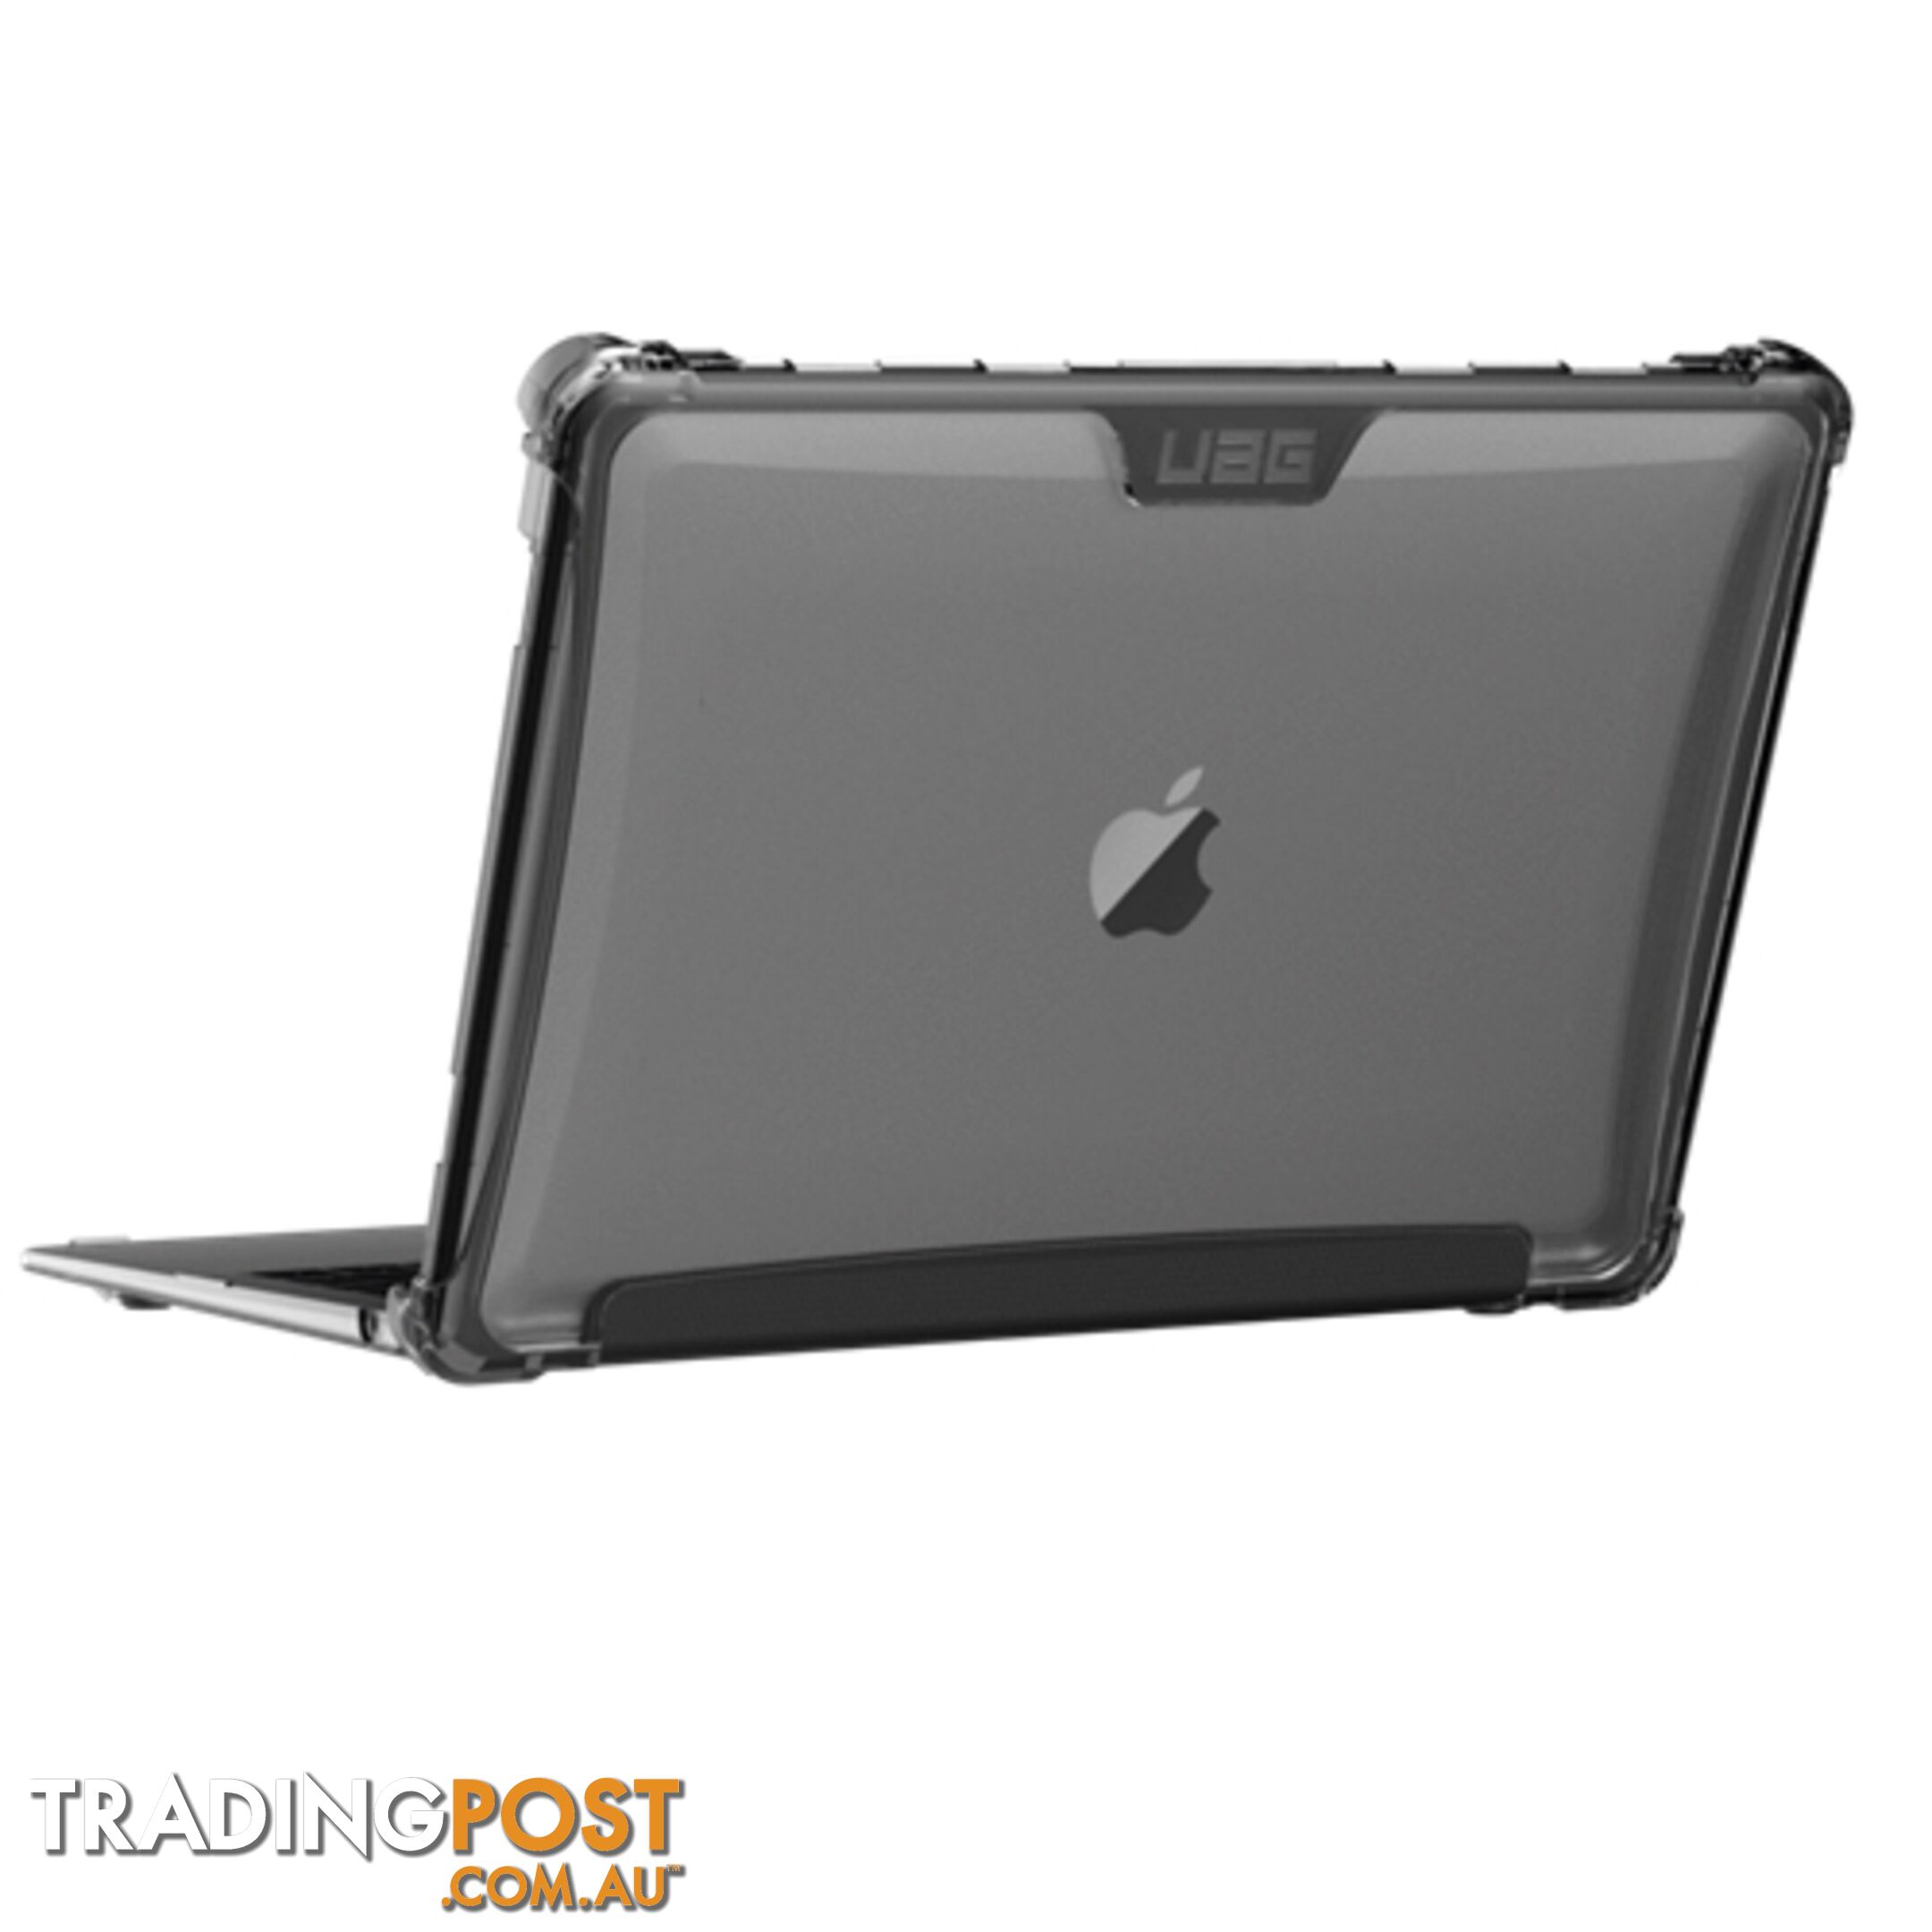 UAG PLYO Protective Cover for Macbook Air 13 inch 2018 - 2019 Ice Clear - 812451031676/131432114343 - UAG